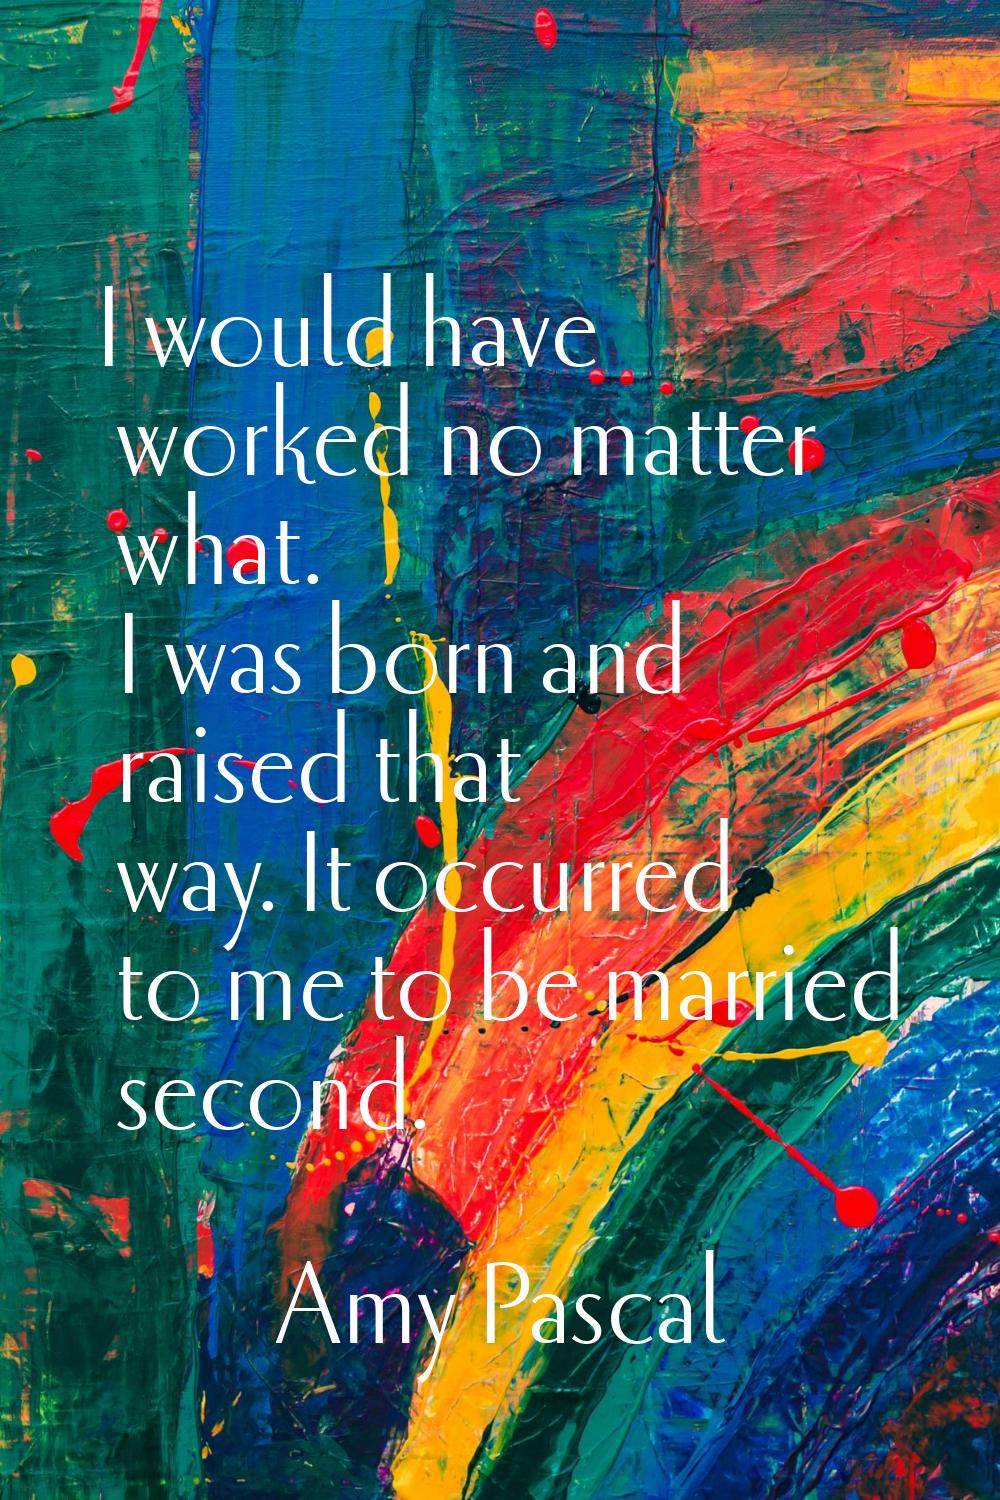 I would have worked no matter what. I was born and raised that way. It occurred to me to be married